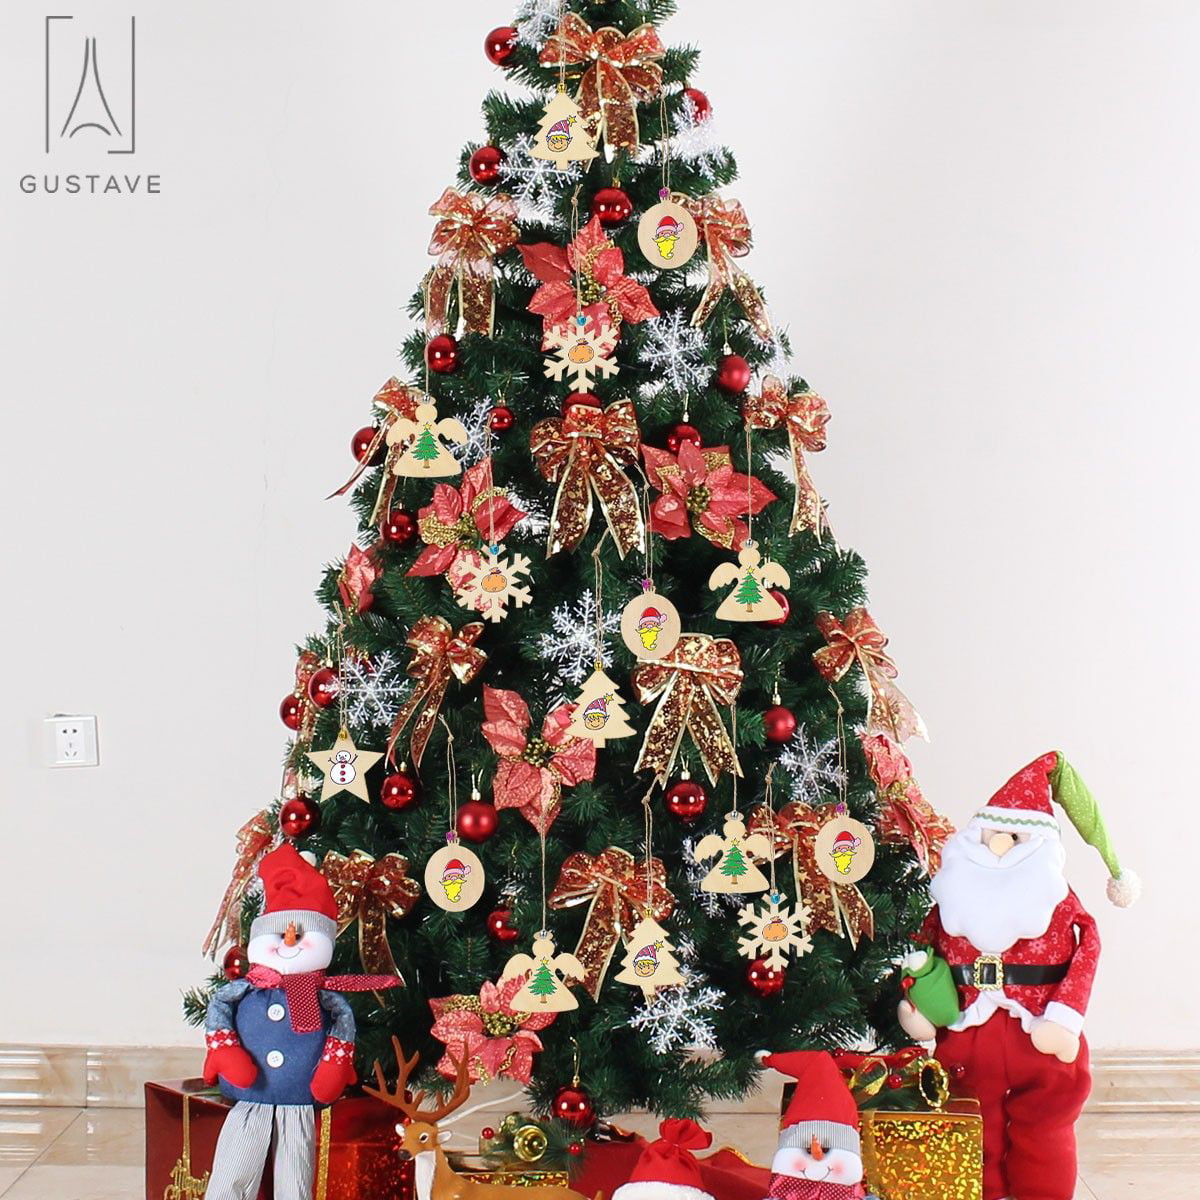 DIY Christmas Tree Christmas Decor Clearanceation: Dark Red Flocking Ball  Painting With Pearl Accents Perfect For Hanging Scene Layout And Festive Christmas  Decor Clearance From Xianstore09, $12.44